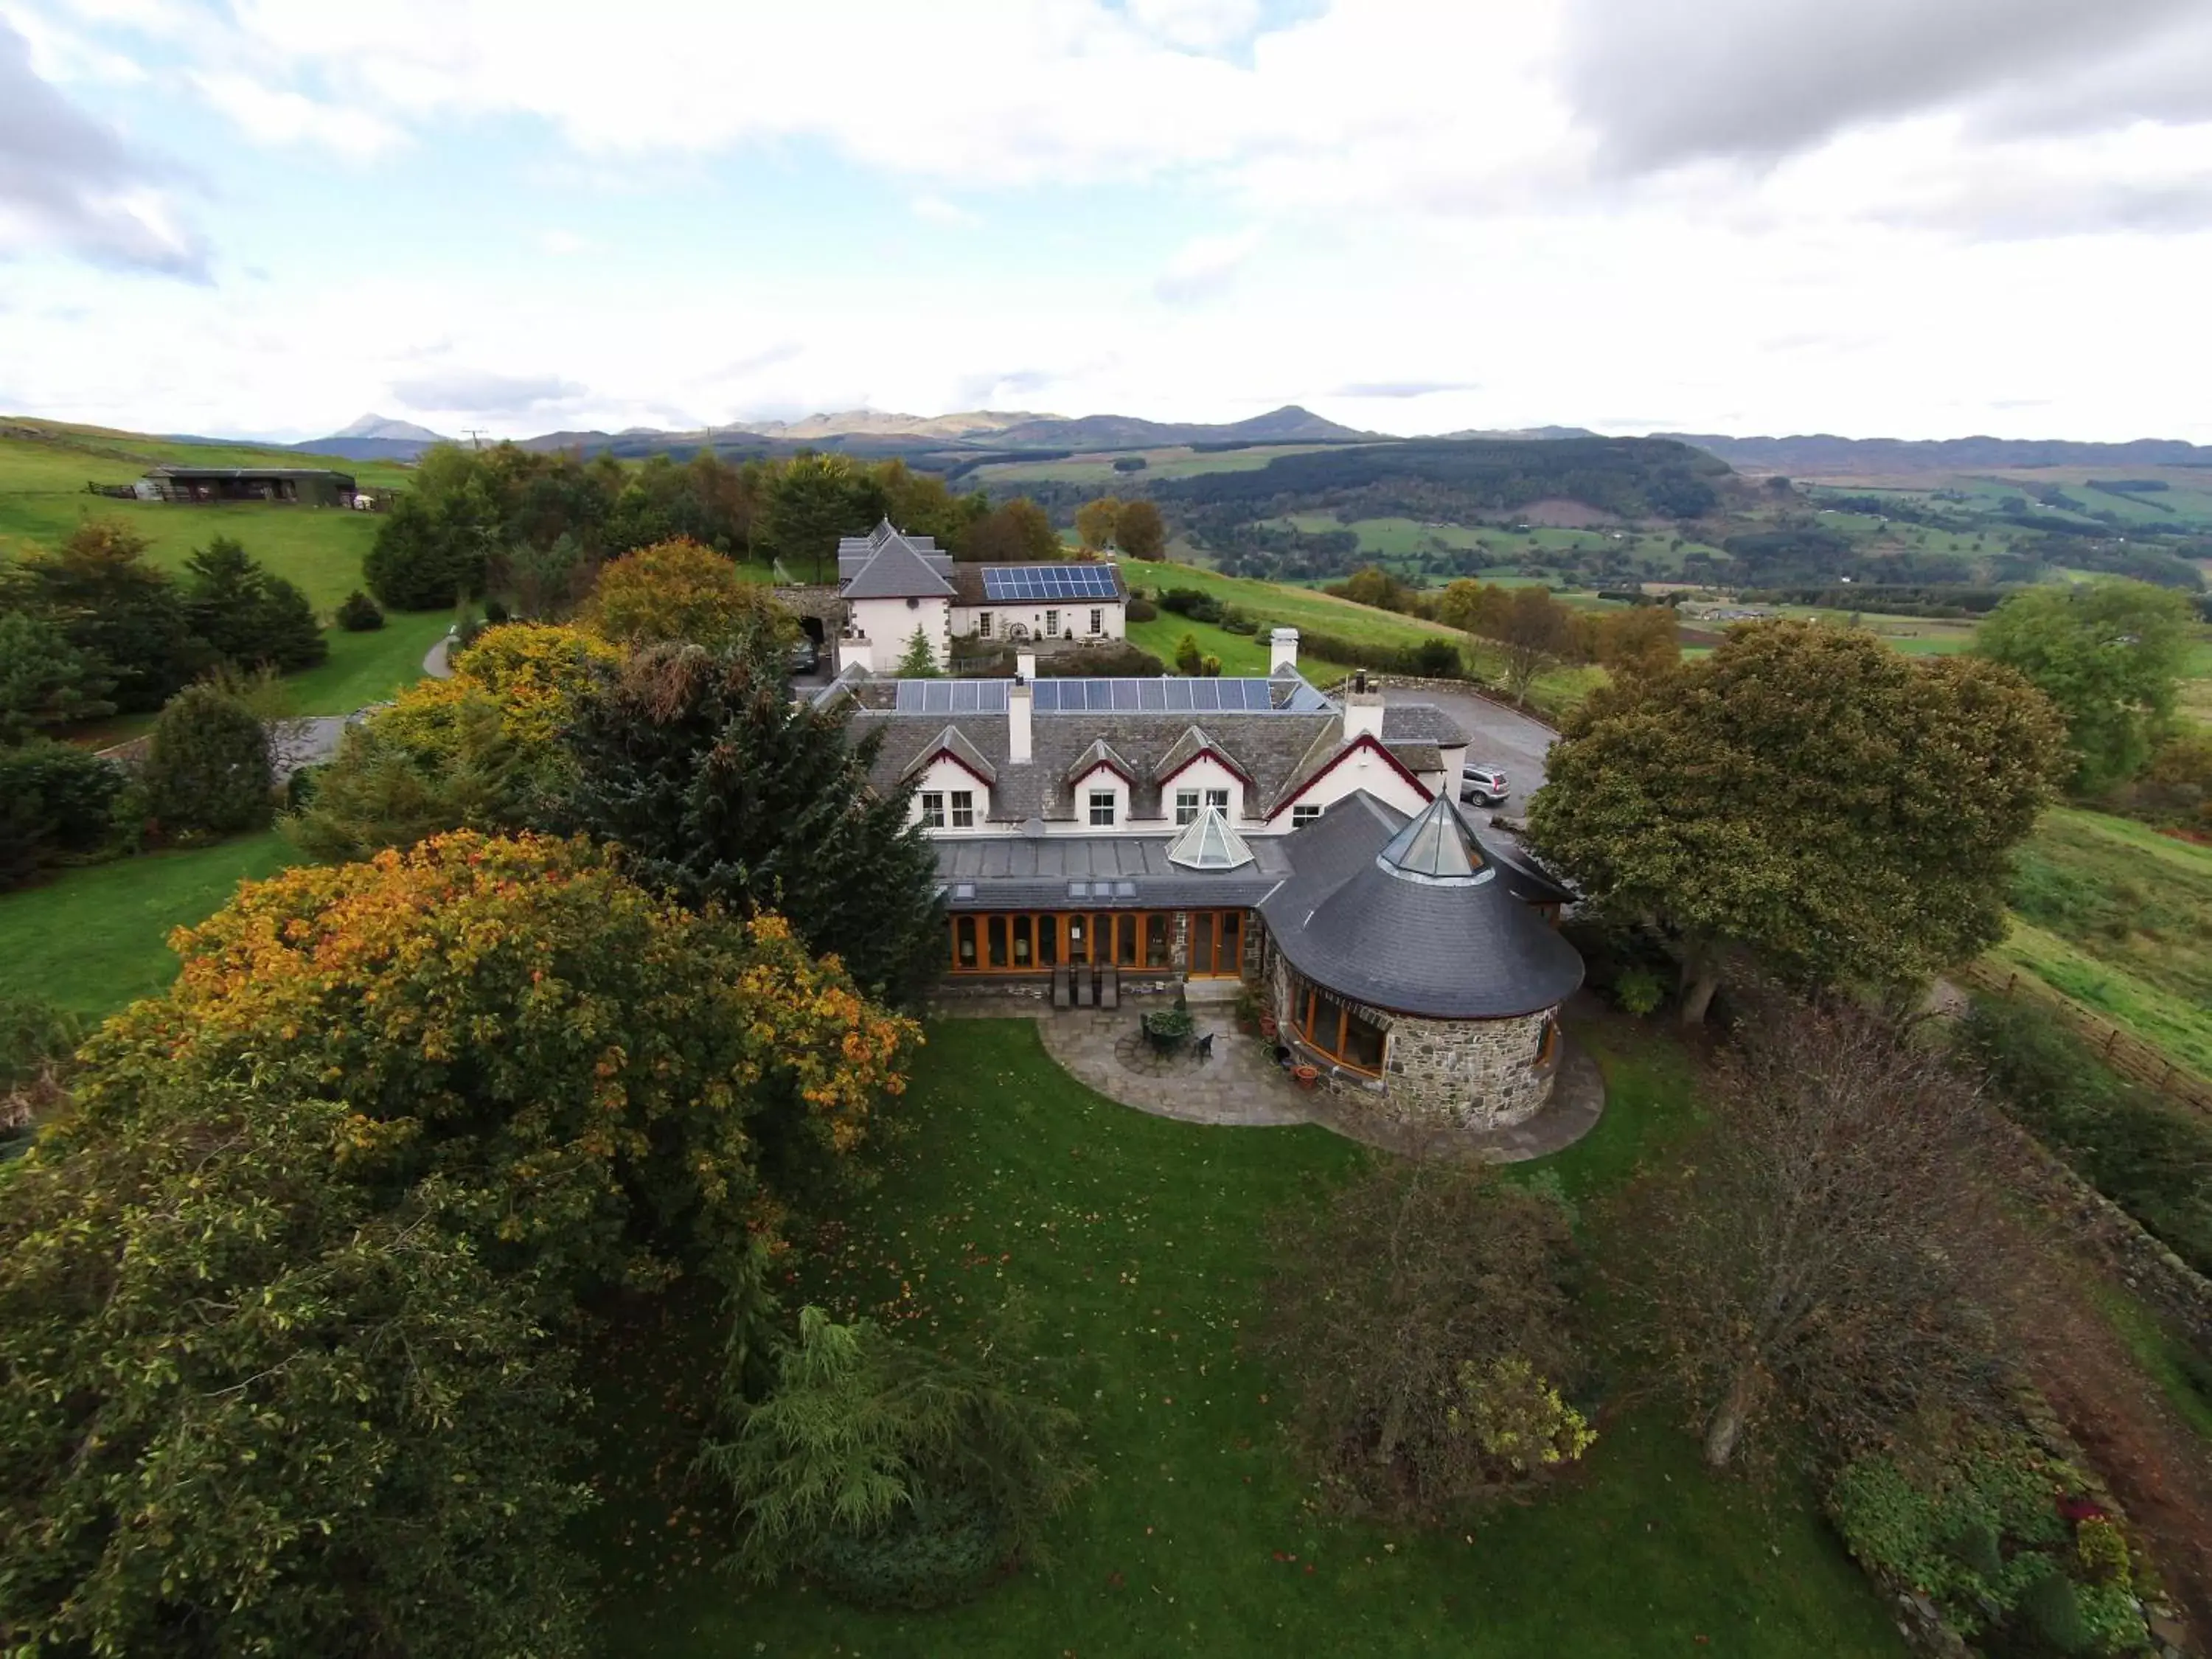 Bird's eye view, Bird's-eye View in Errichel House and Cottages